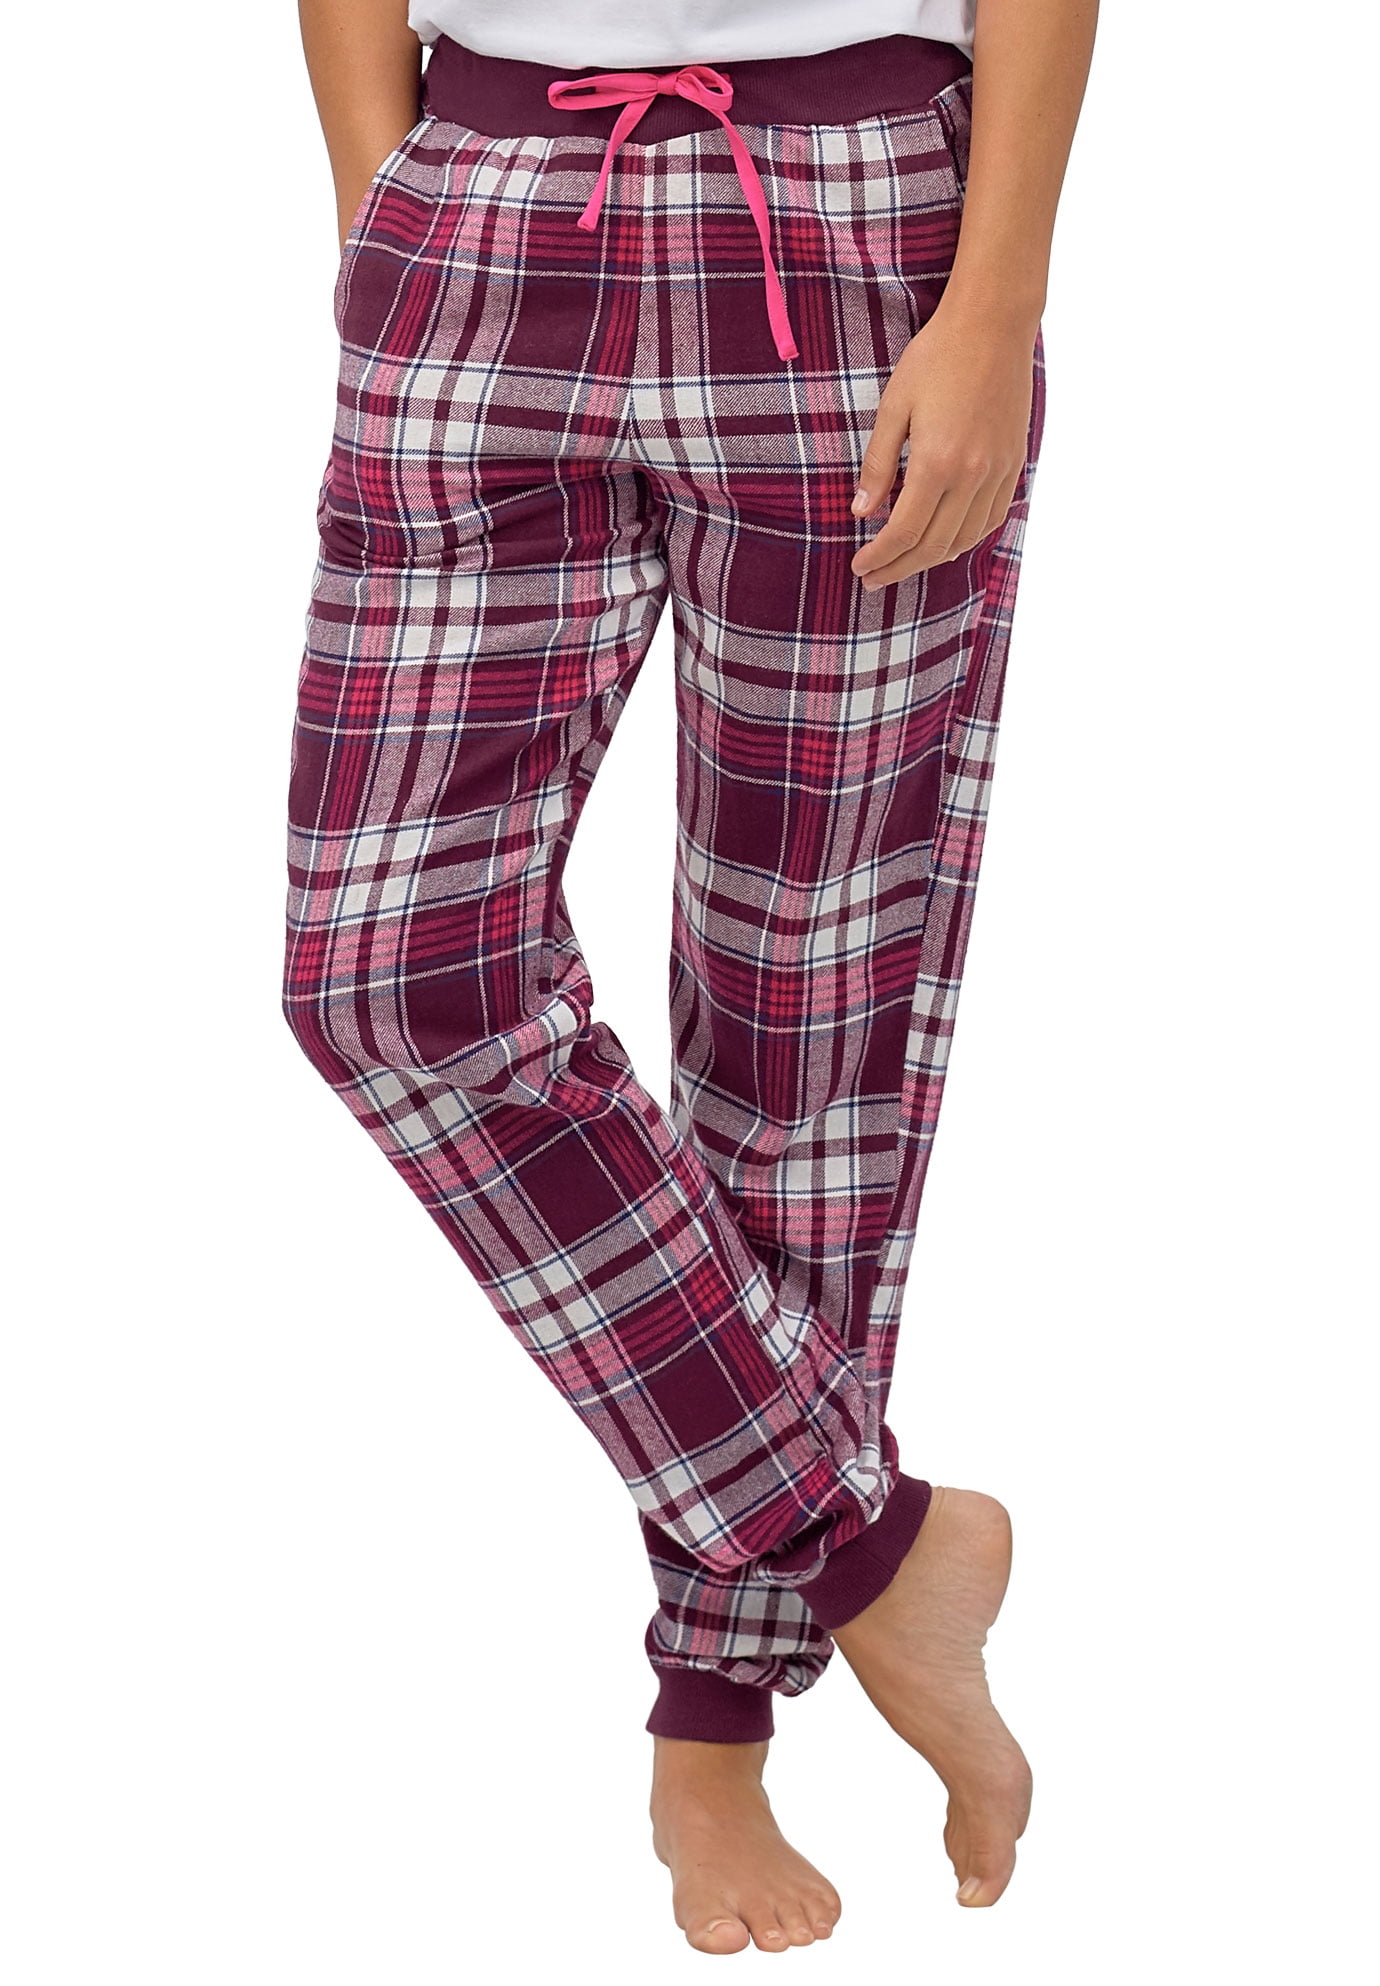 Beverly Rock Womens 100% Cotton Flannel Plaid Lounge Pants Available in Plus Size 